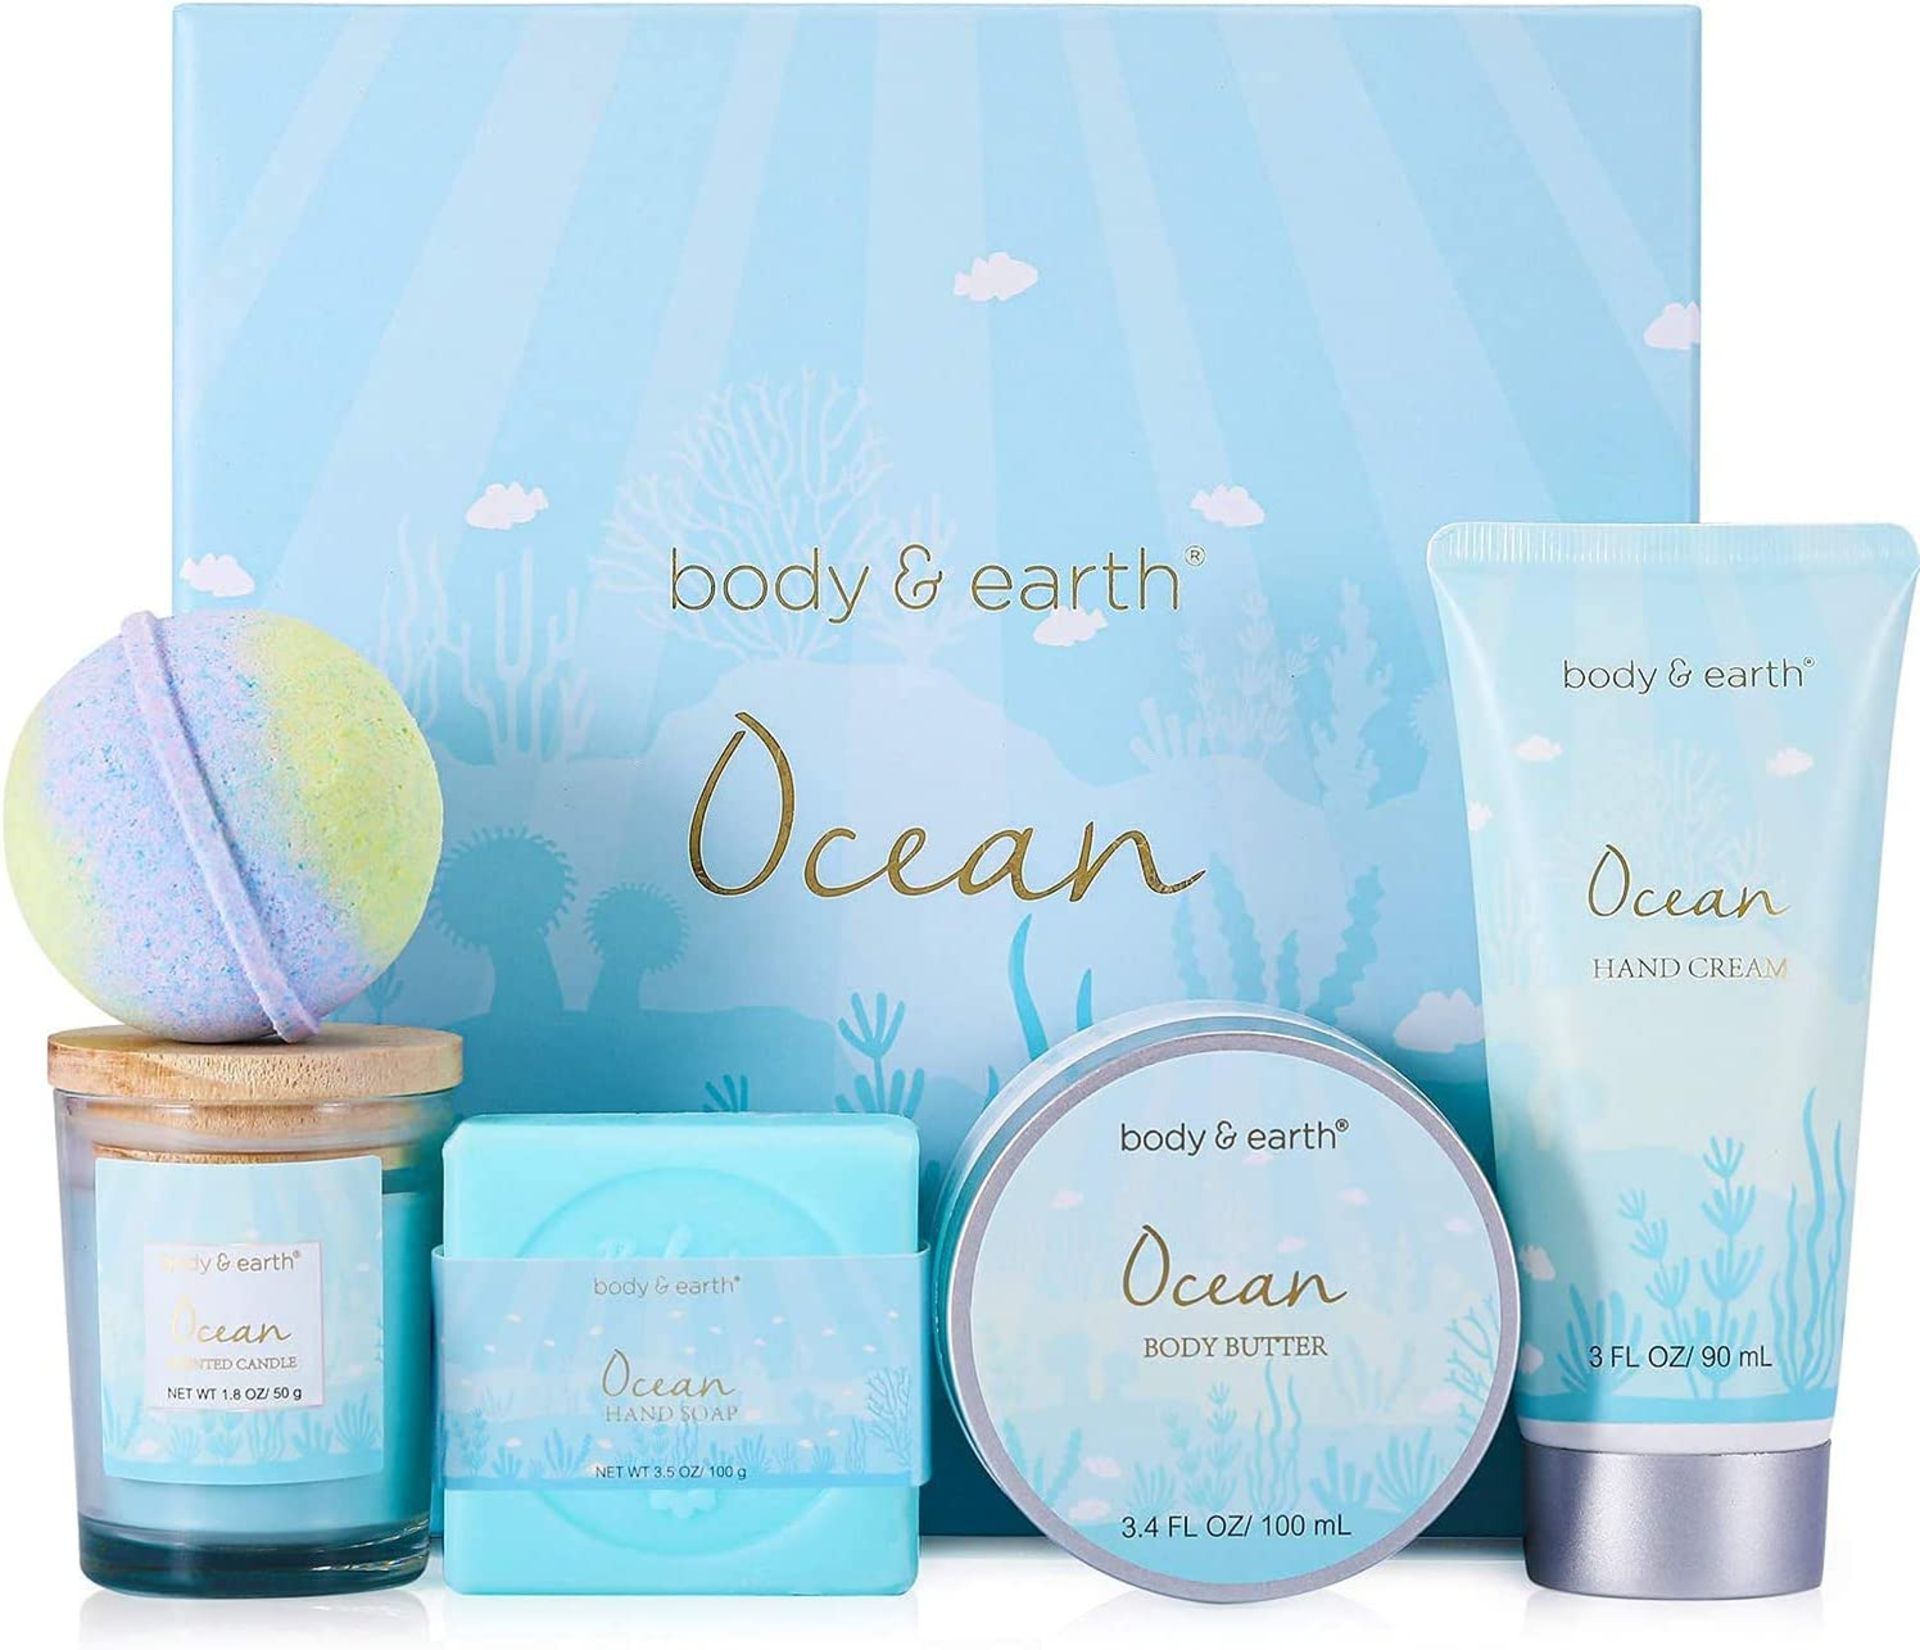 PALLET TO CONTAIN 96 X NEW BOXED BODY & EARTH OCEAN 5 PIECE GIFT SETS. EACH SET INCLUDES: BATH BOMB,